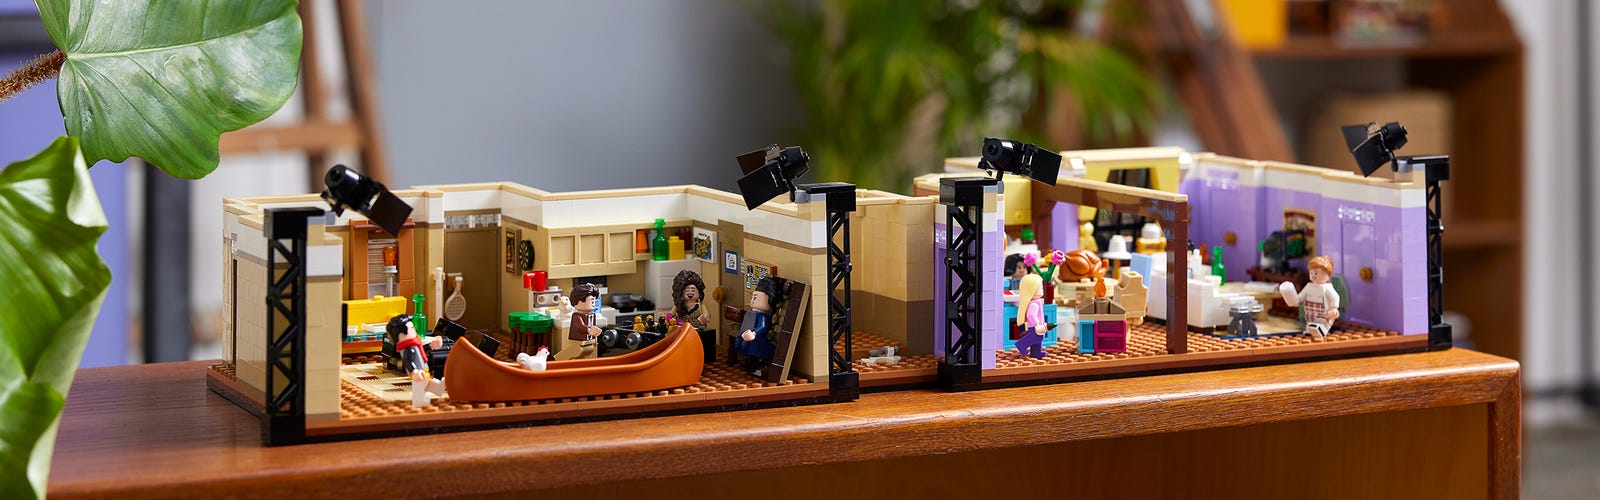 New Lego 'Friends' Apartments Set brings the show to life in a new way